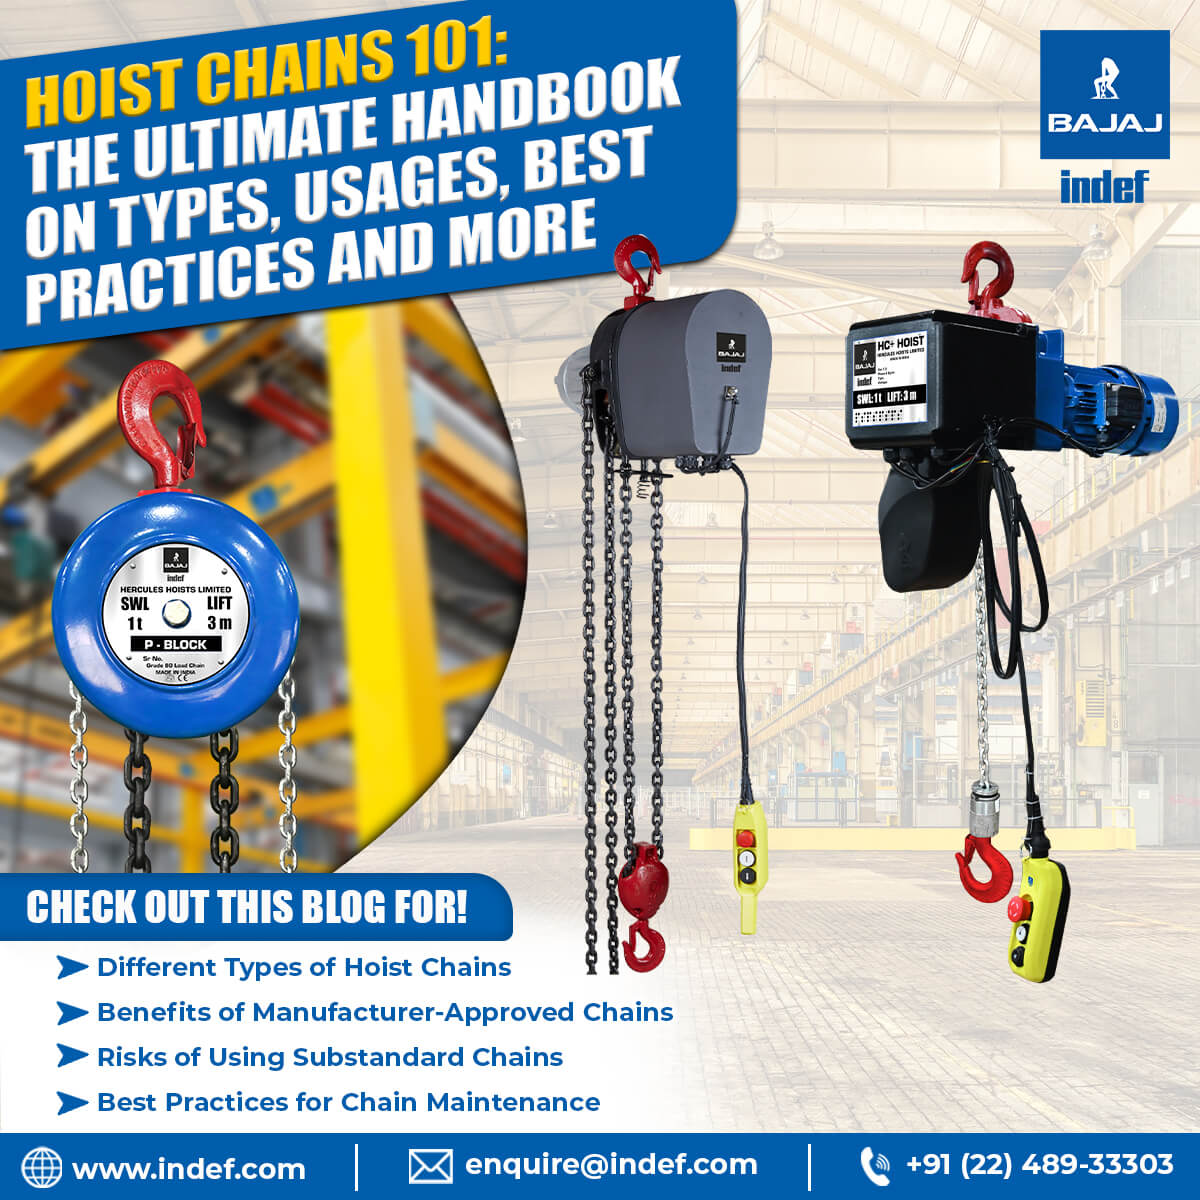 Hoist Chains 101 The Ultimate Handbook on Types, Usages, Best Practices and More